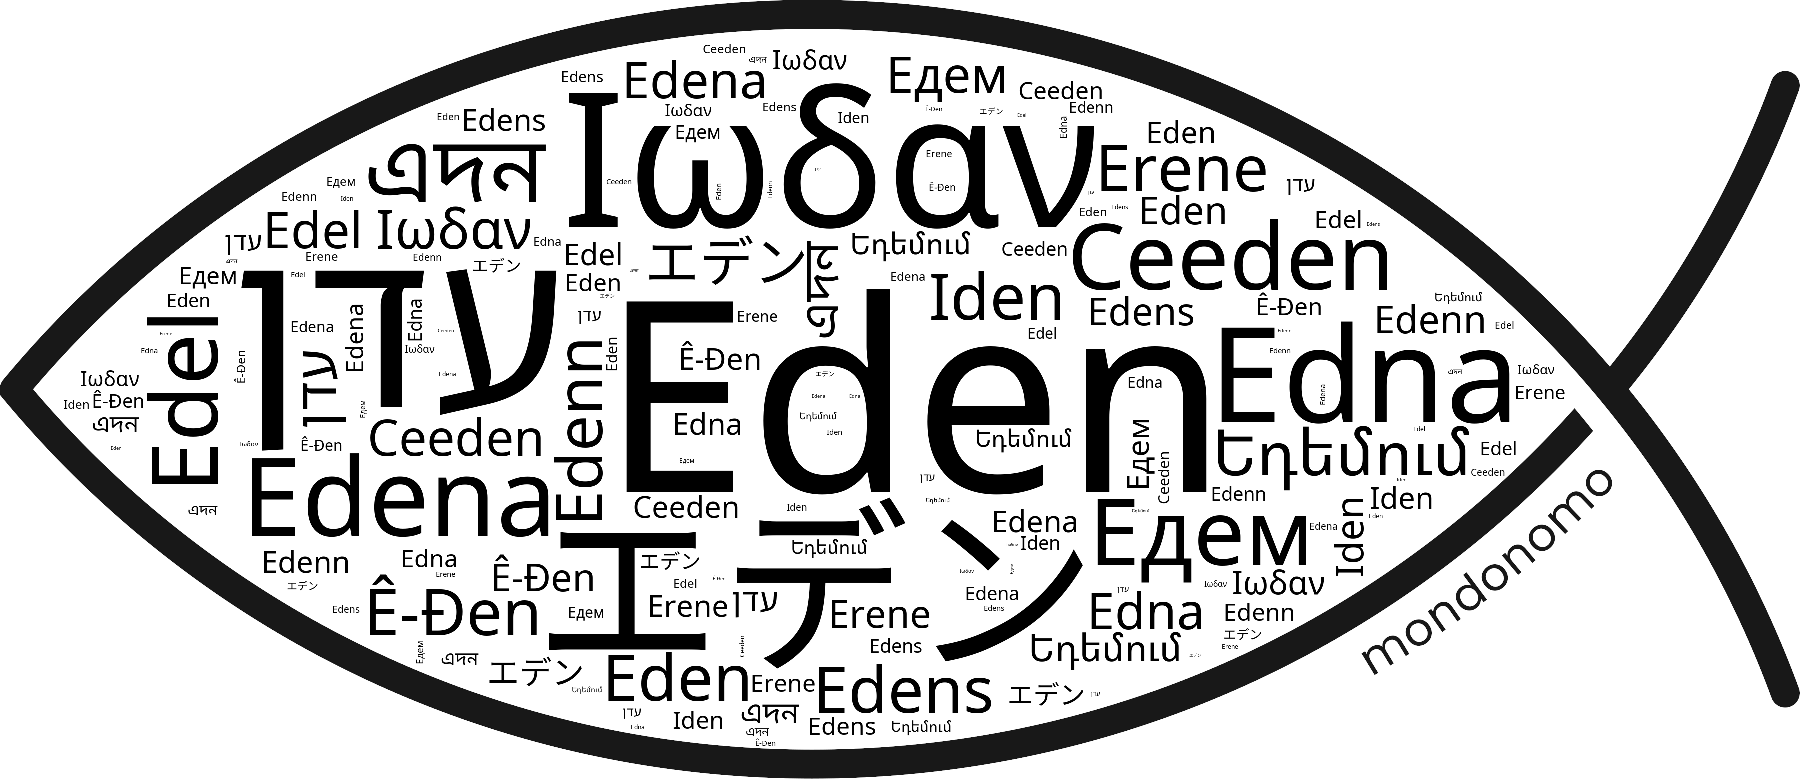 Name Eden in the world's Bibles